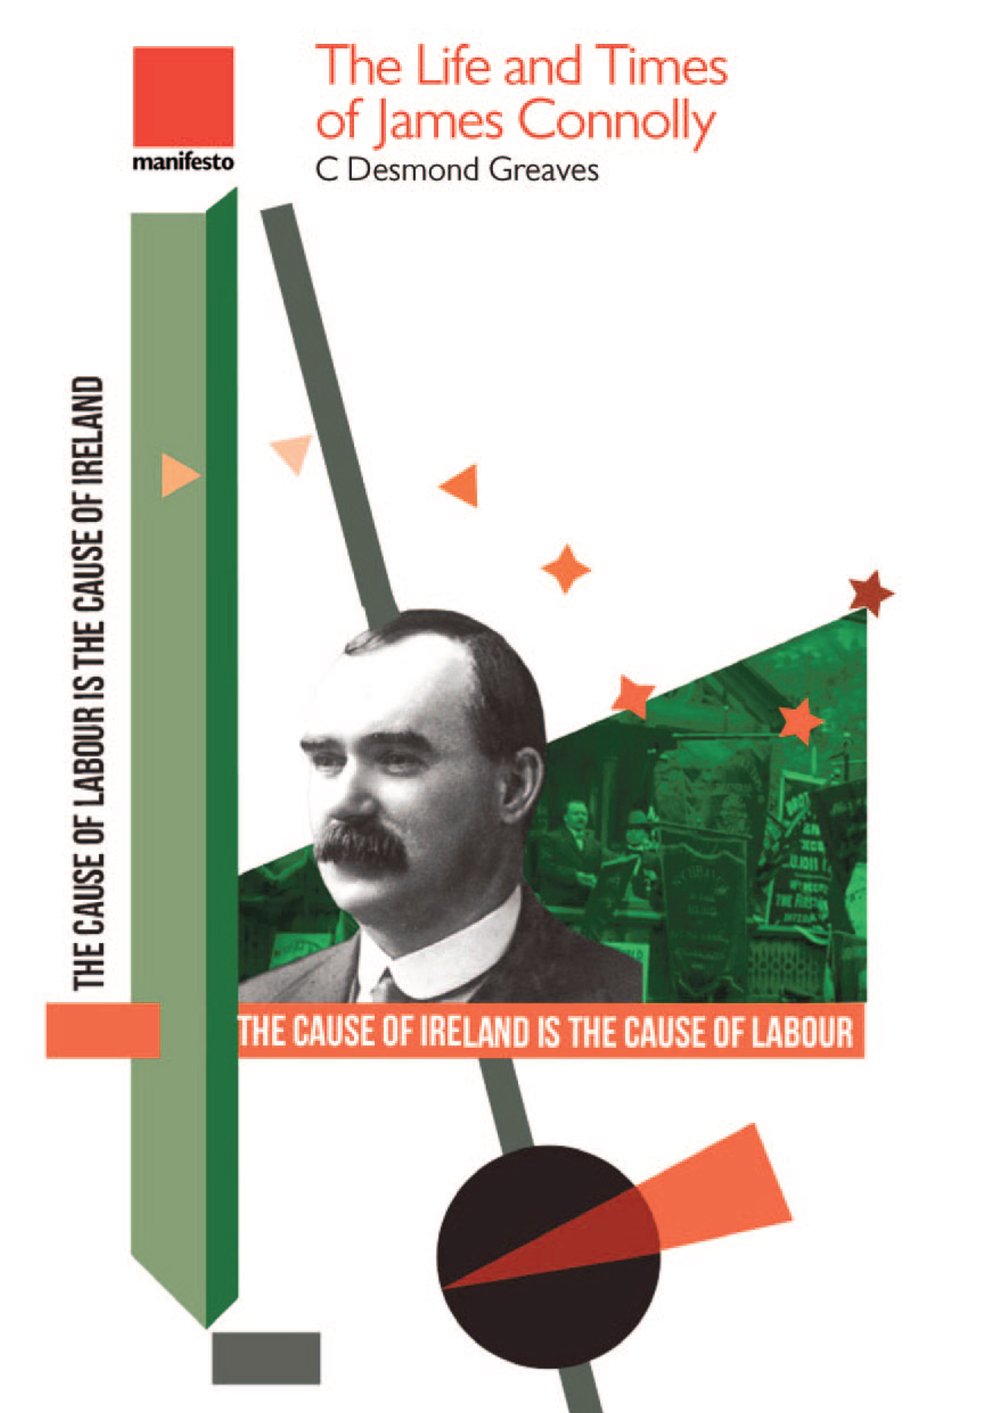 The life and times of James Connolly